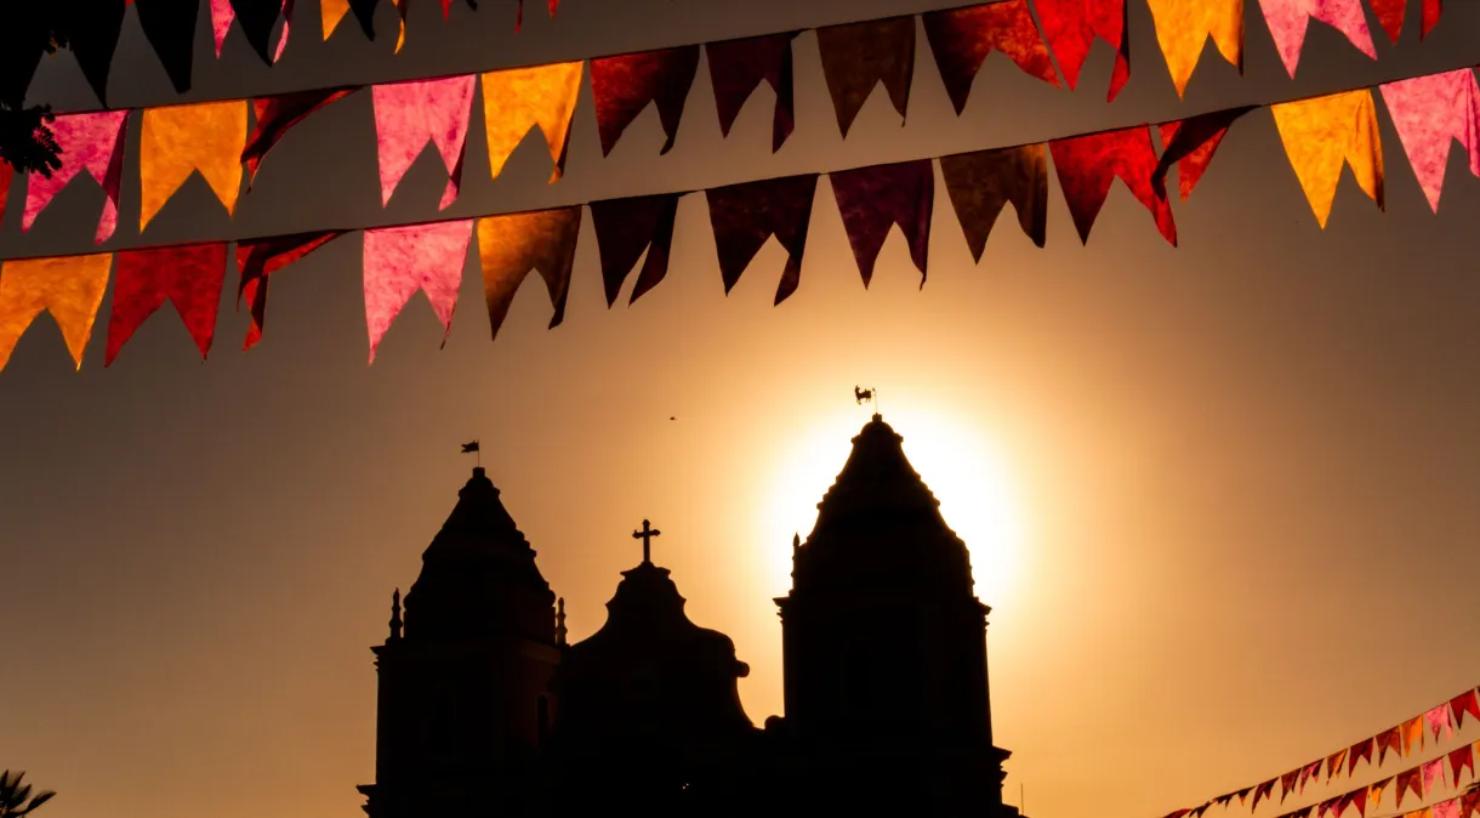 June Festivals: Learn About the Catholic Saints Celebrated in June in Brazil